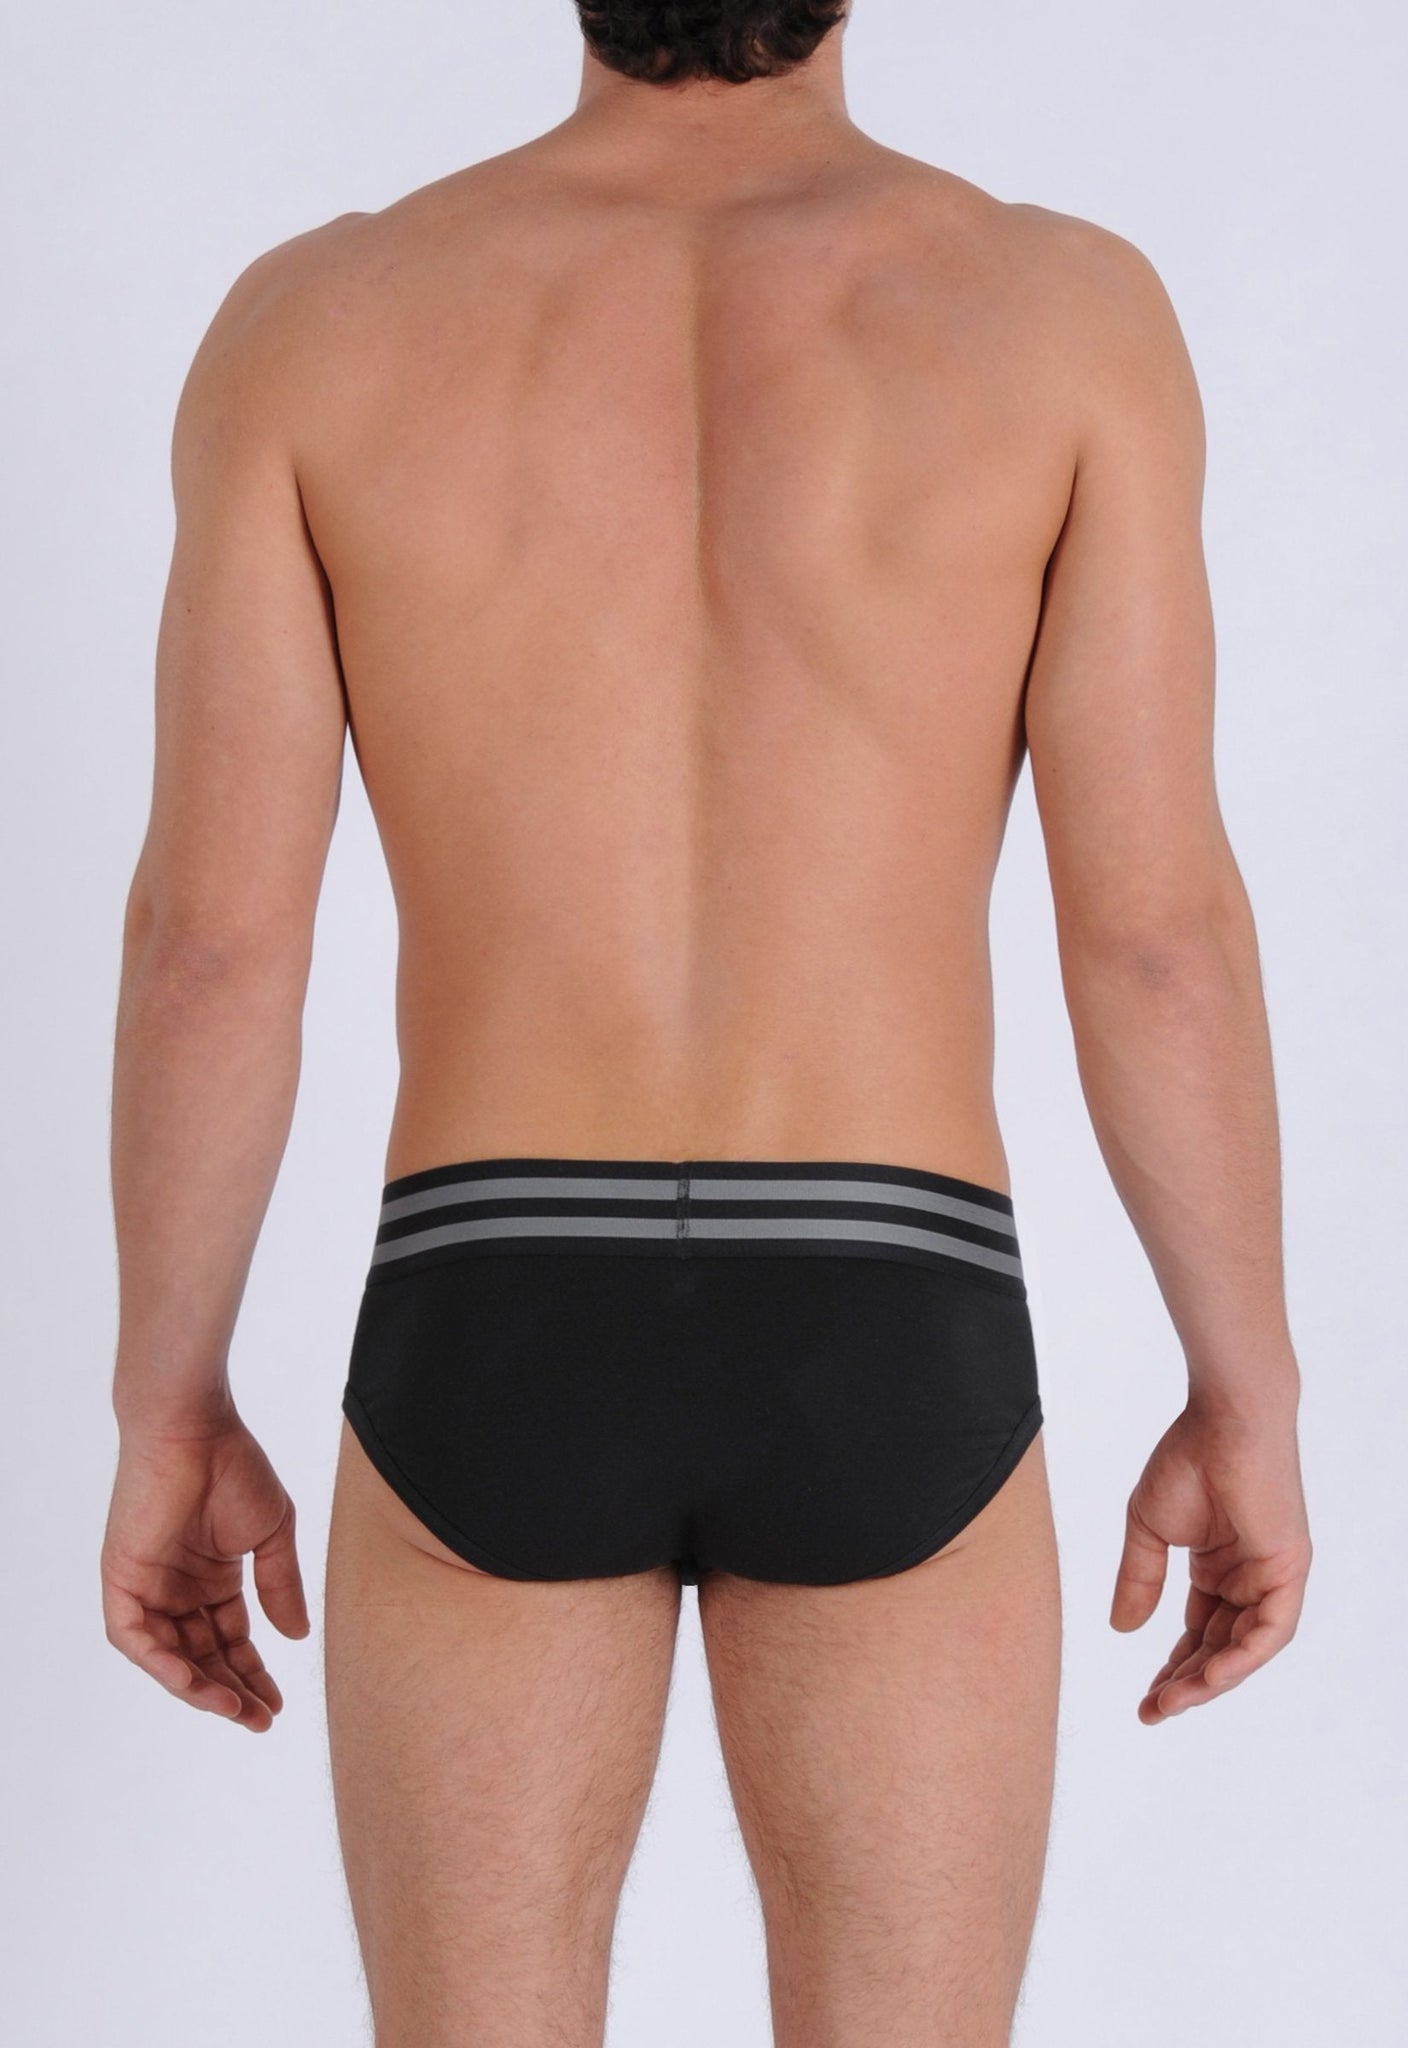 Ginch Gonch Men's Signature Series Underwear - Low Rise Brief Black thick waistband back